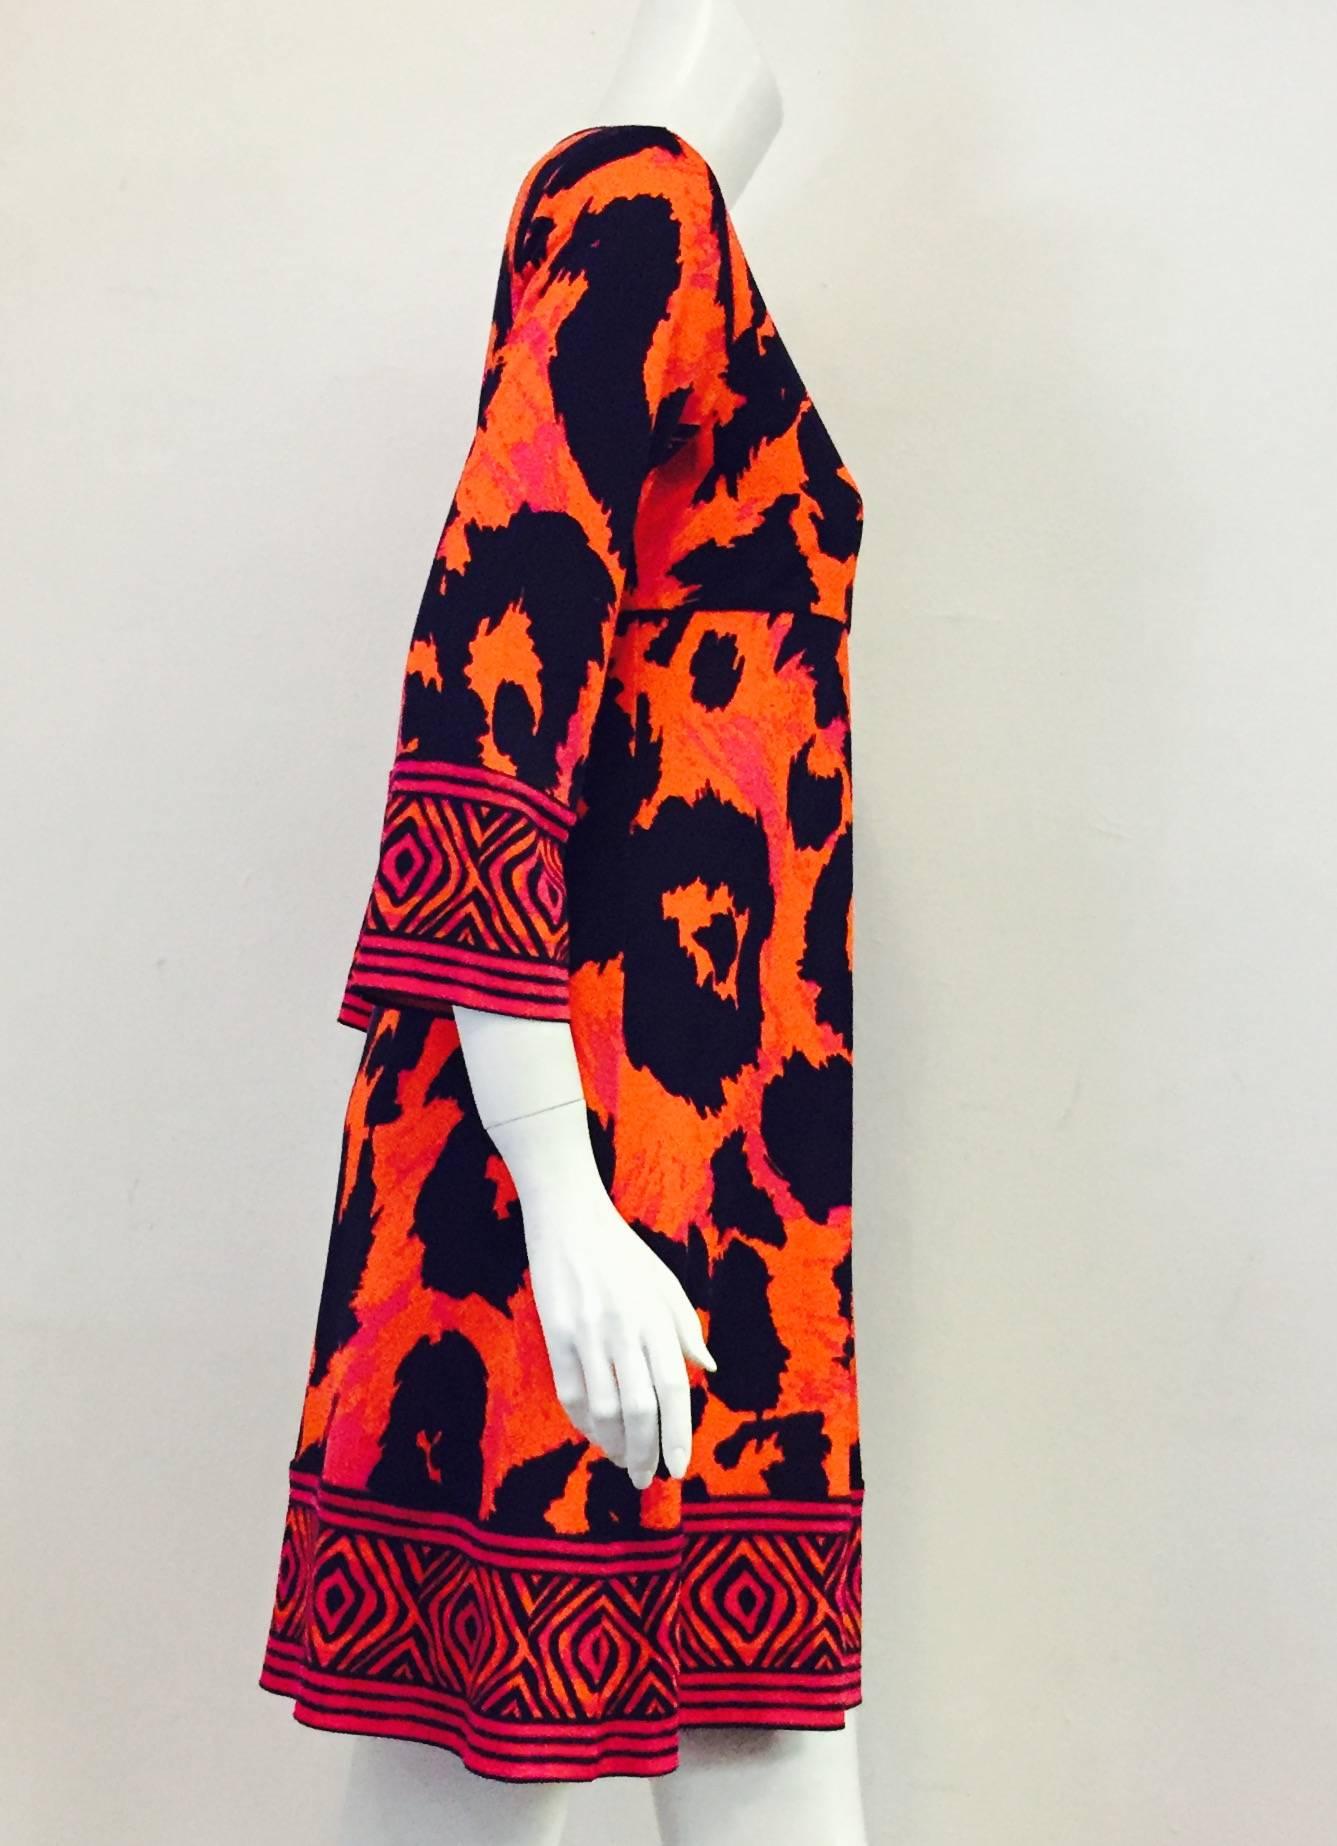 Diane von Furstenberg's ubiquitous wrap dresses of the 1970s are still coveted by practical, yet stylish, women all over the world!  Although sporting a 